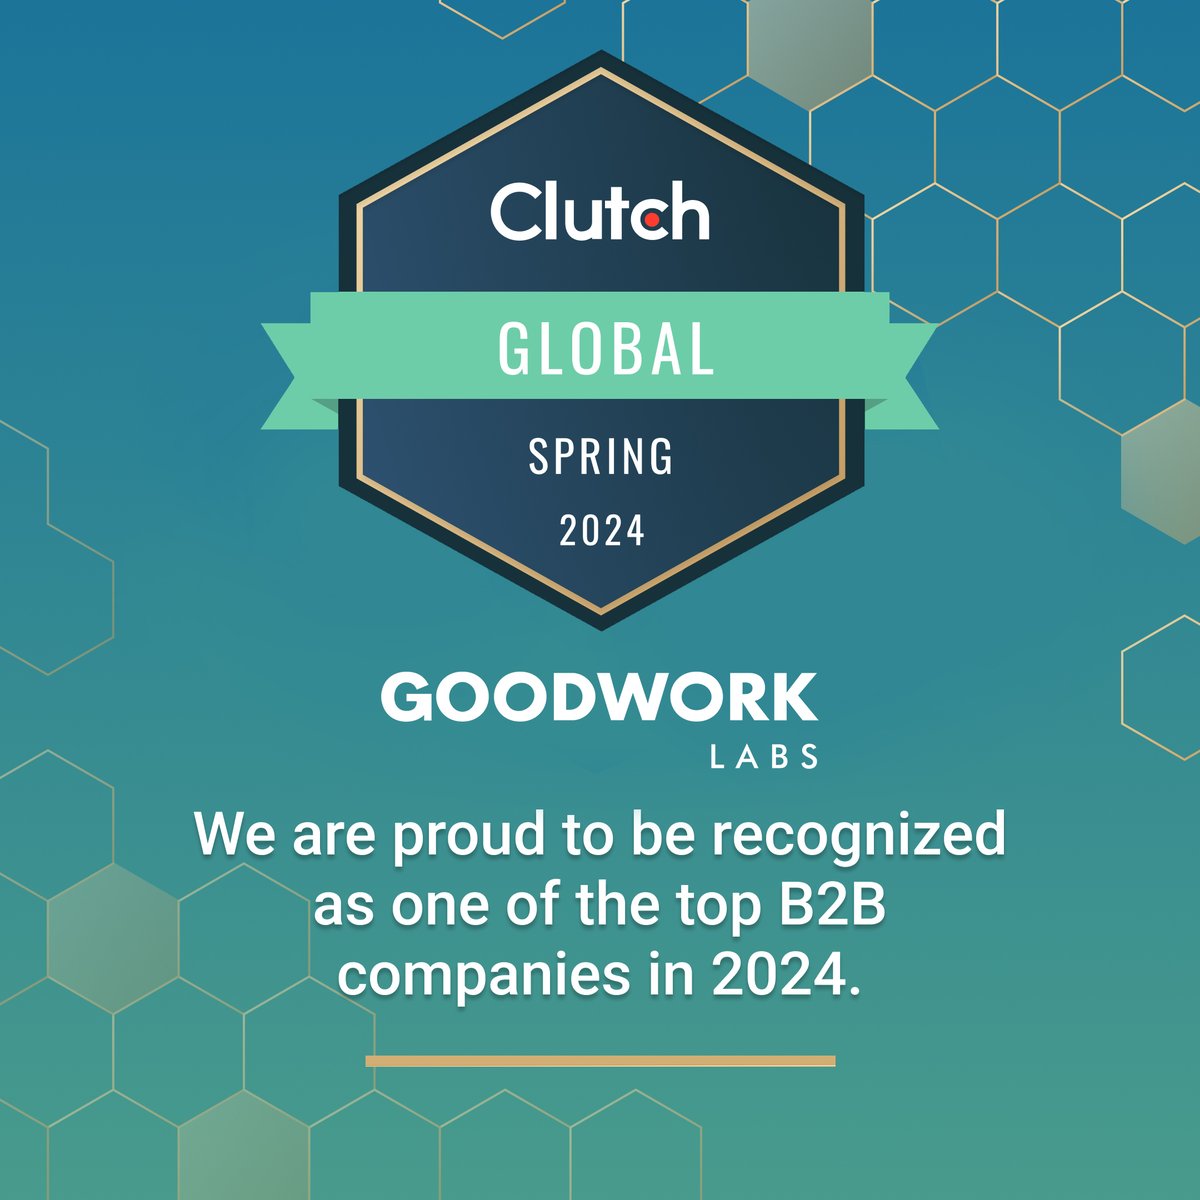 We're thrilled to announce #GoodWorkLabs as a #ClutchGlobalLeader & #ClutchChampion winner! This places us among the top 10% of B2B service providers. 
#Clutch #Award #ITconsultation #ITConsulting #AI #CloudServices #Webdevelopment #Softwaredevelopment #appdevelopment #success